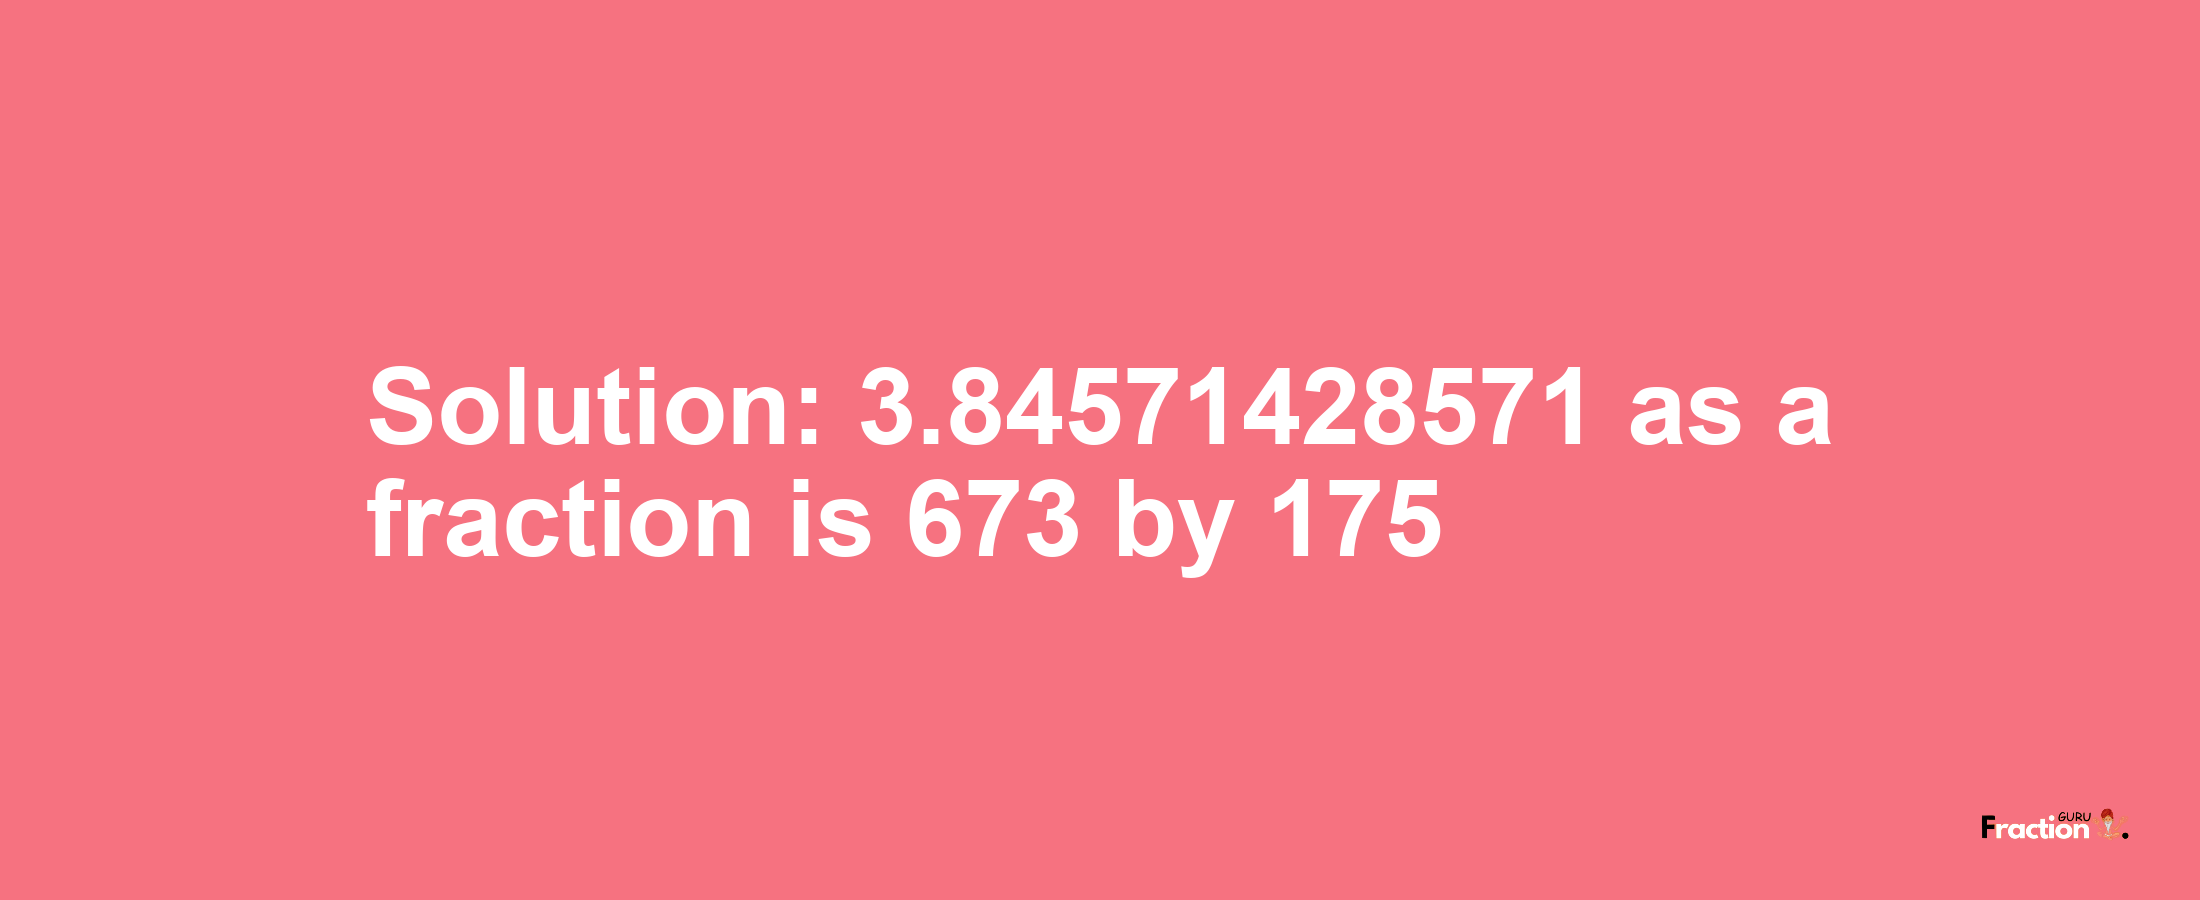 Solution:3.84571428571 as a fraction is 673/175